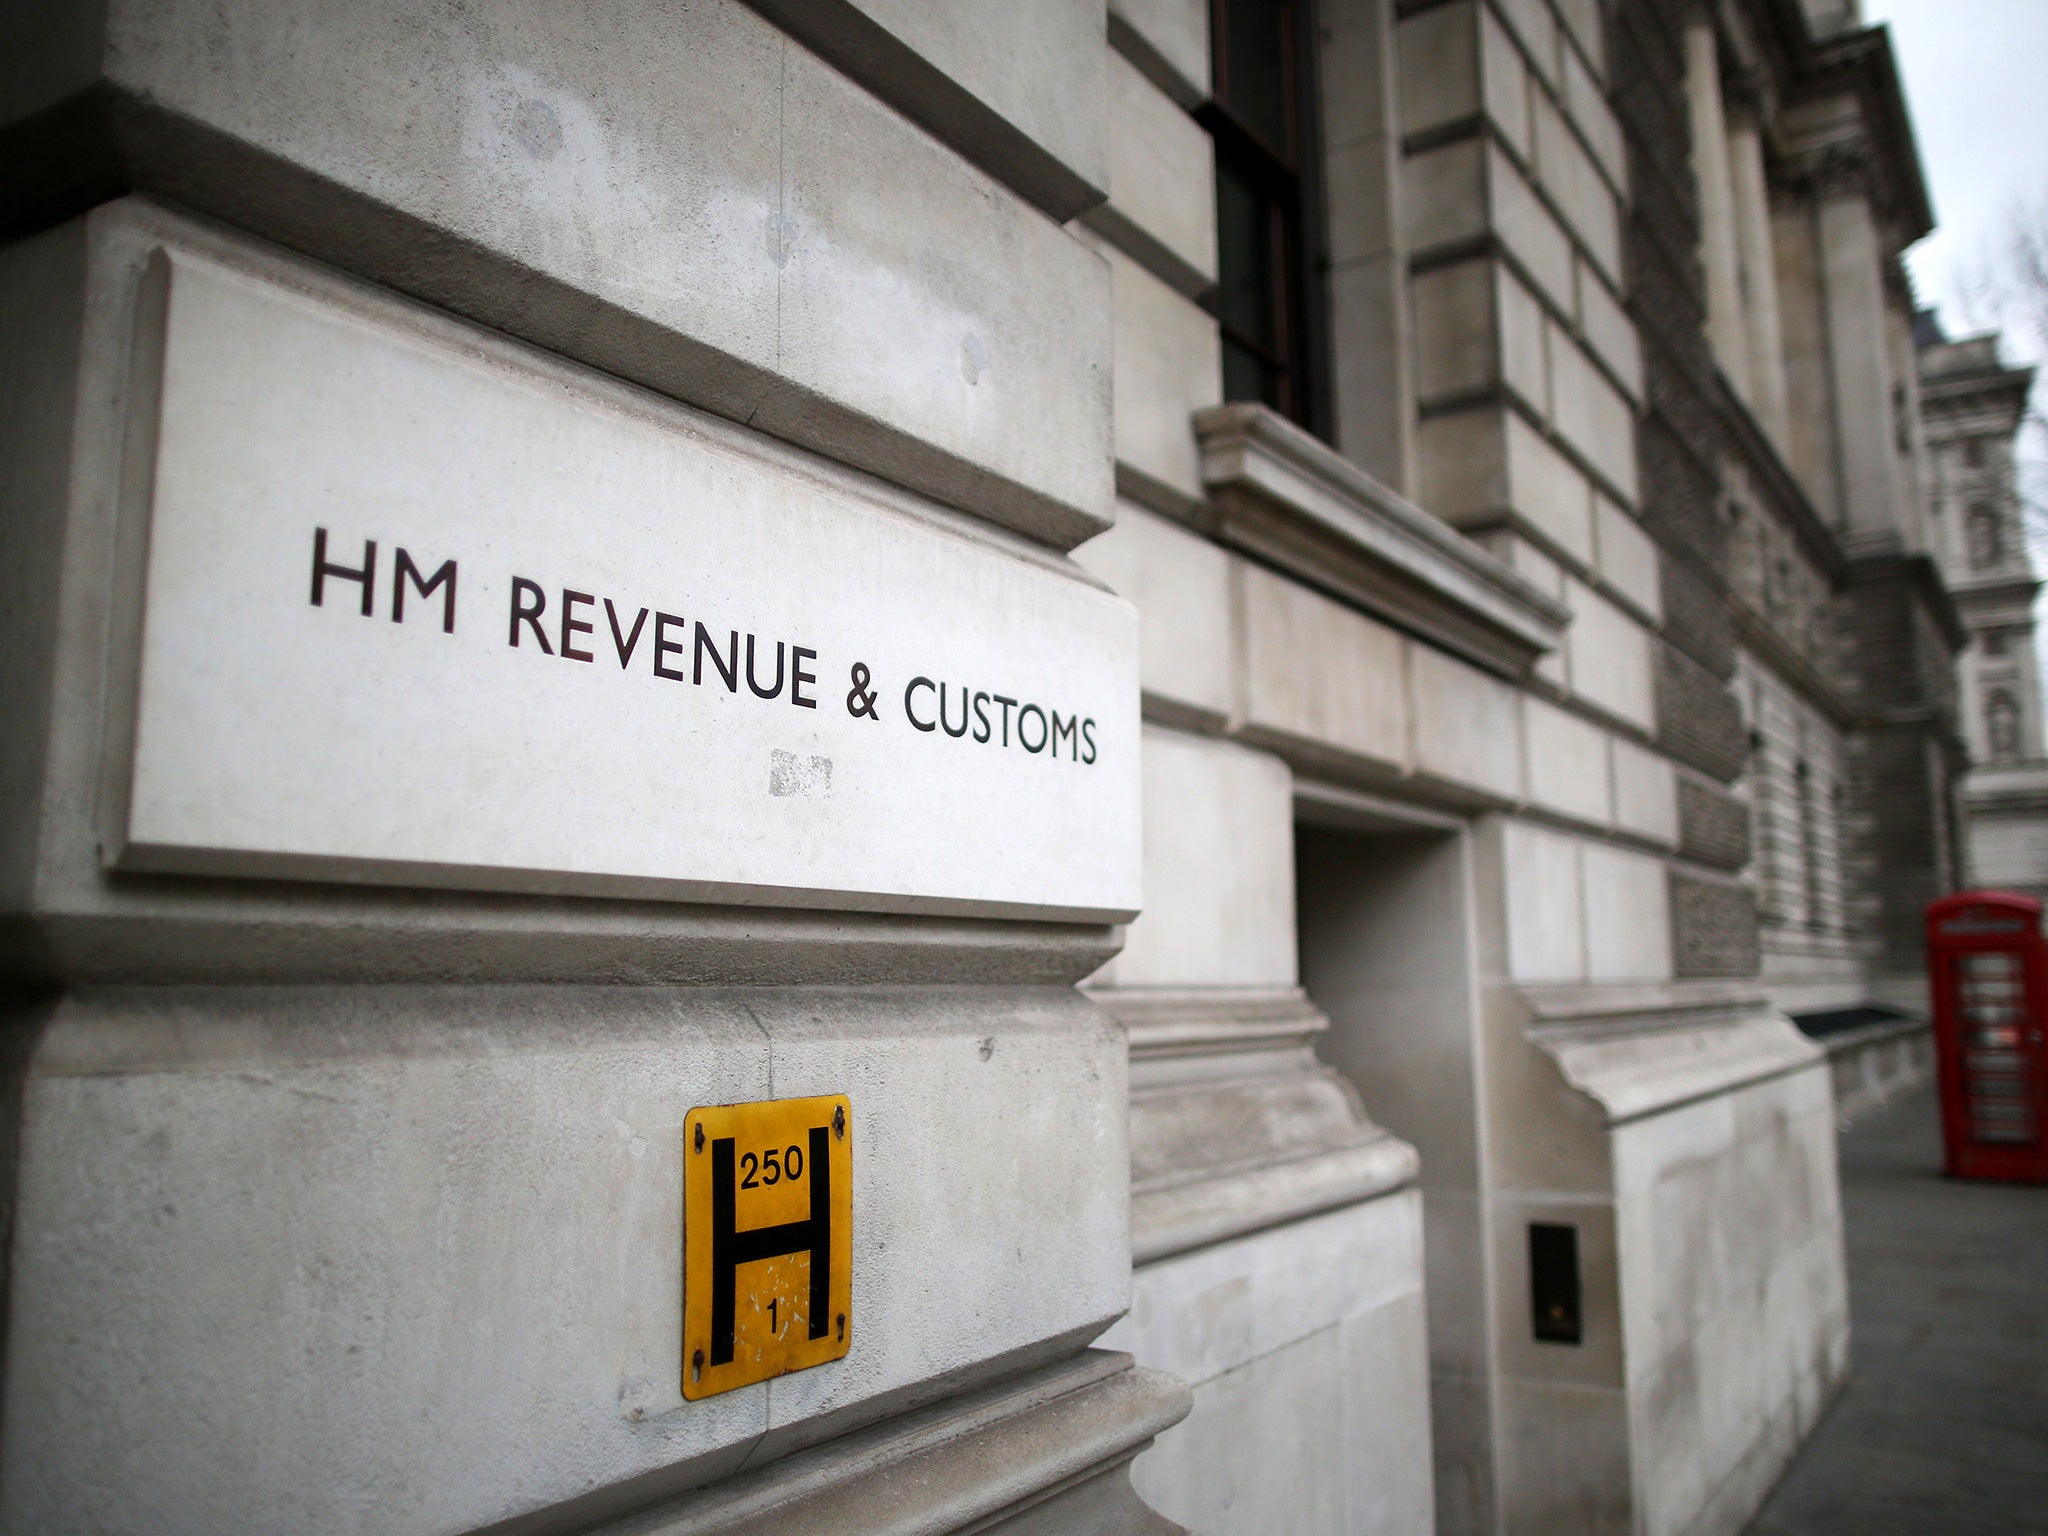 HMRC contracts US firm Concentrix to investigate tax credit claims